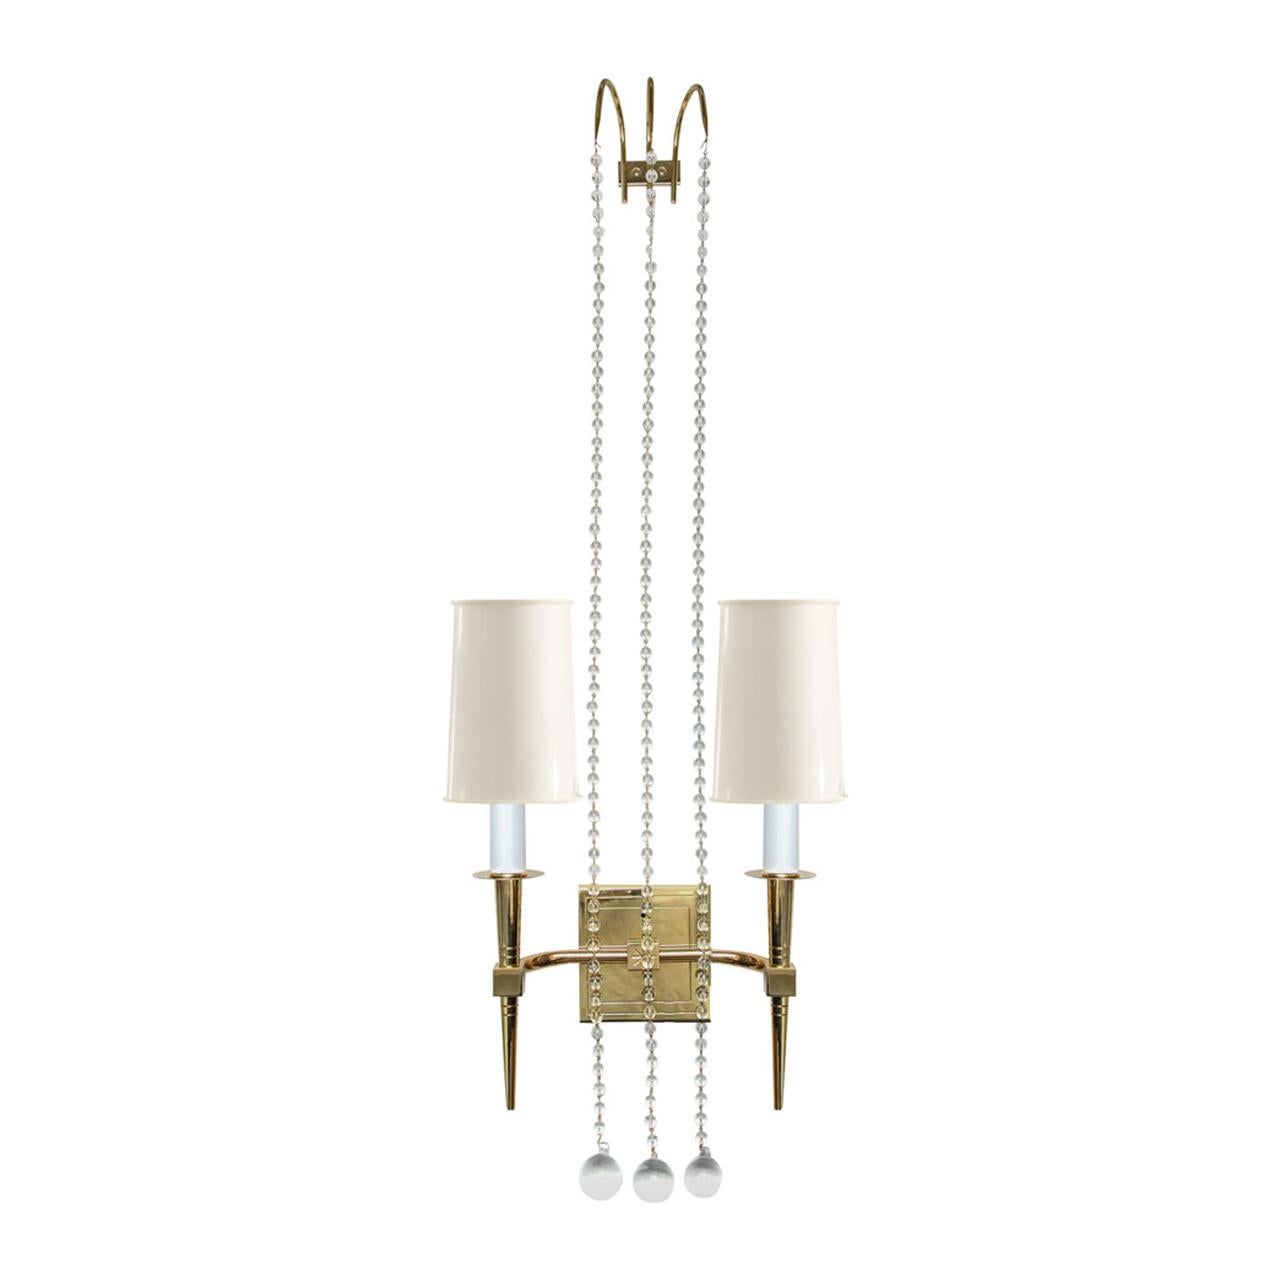 Pair of sconces model no 12 in brass with suspended crystals by Tommi Parzinger for Parzinger Originals, American, 1950s. These are beautifully made and very elegant.